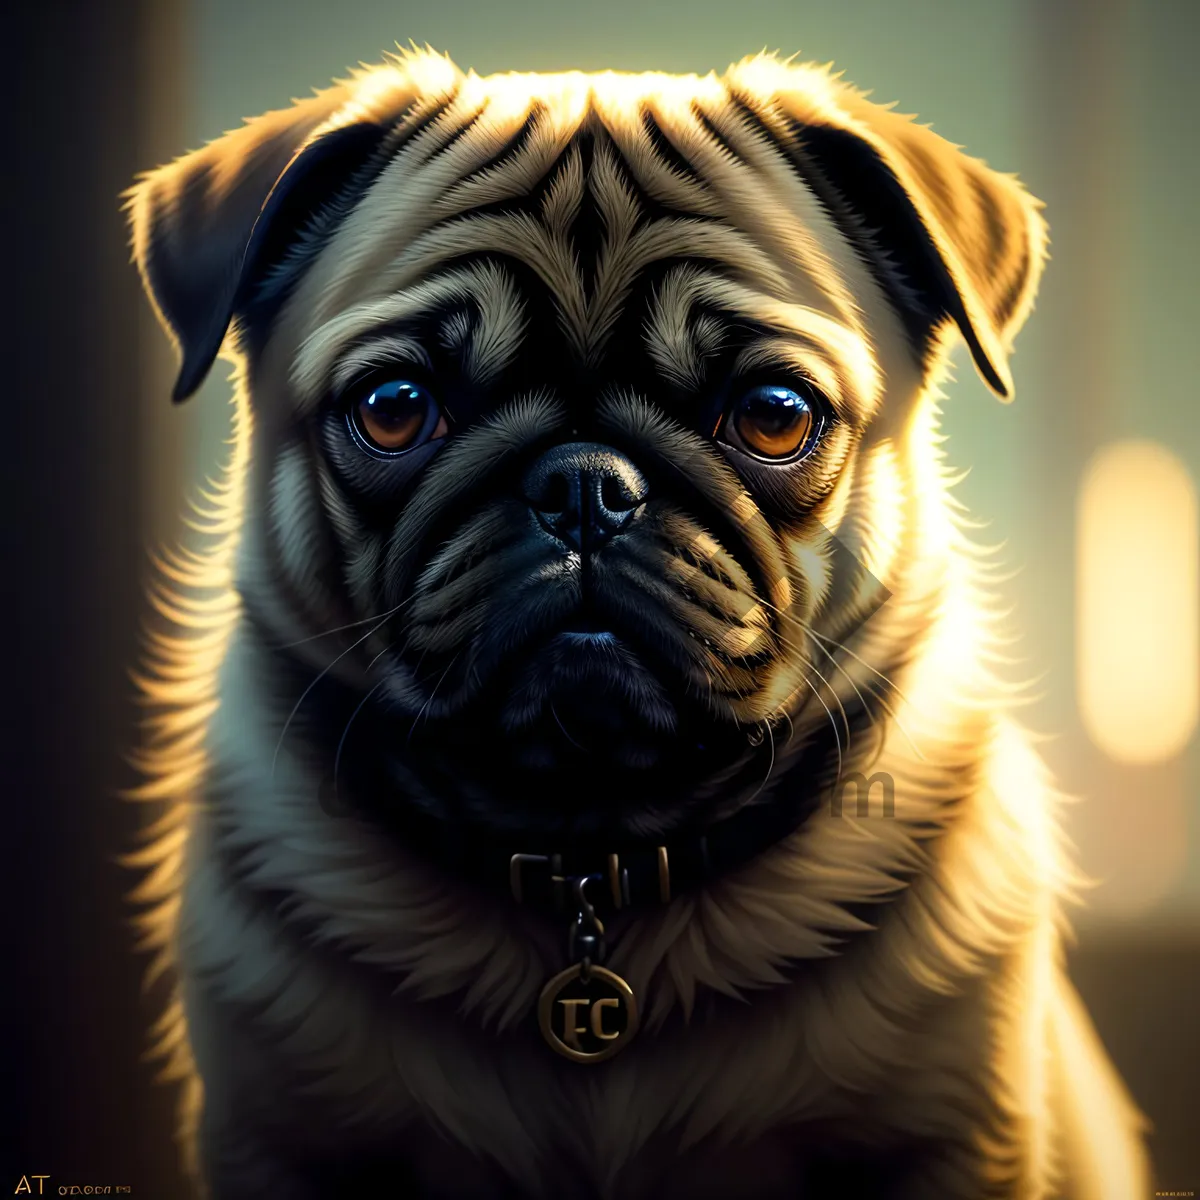 Picture of Cute Pug Puppy Sitting - Adorable Canine Portrait